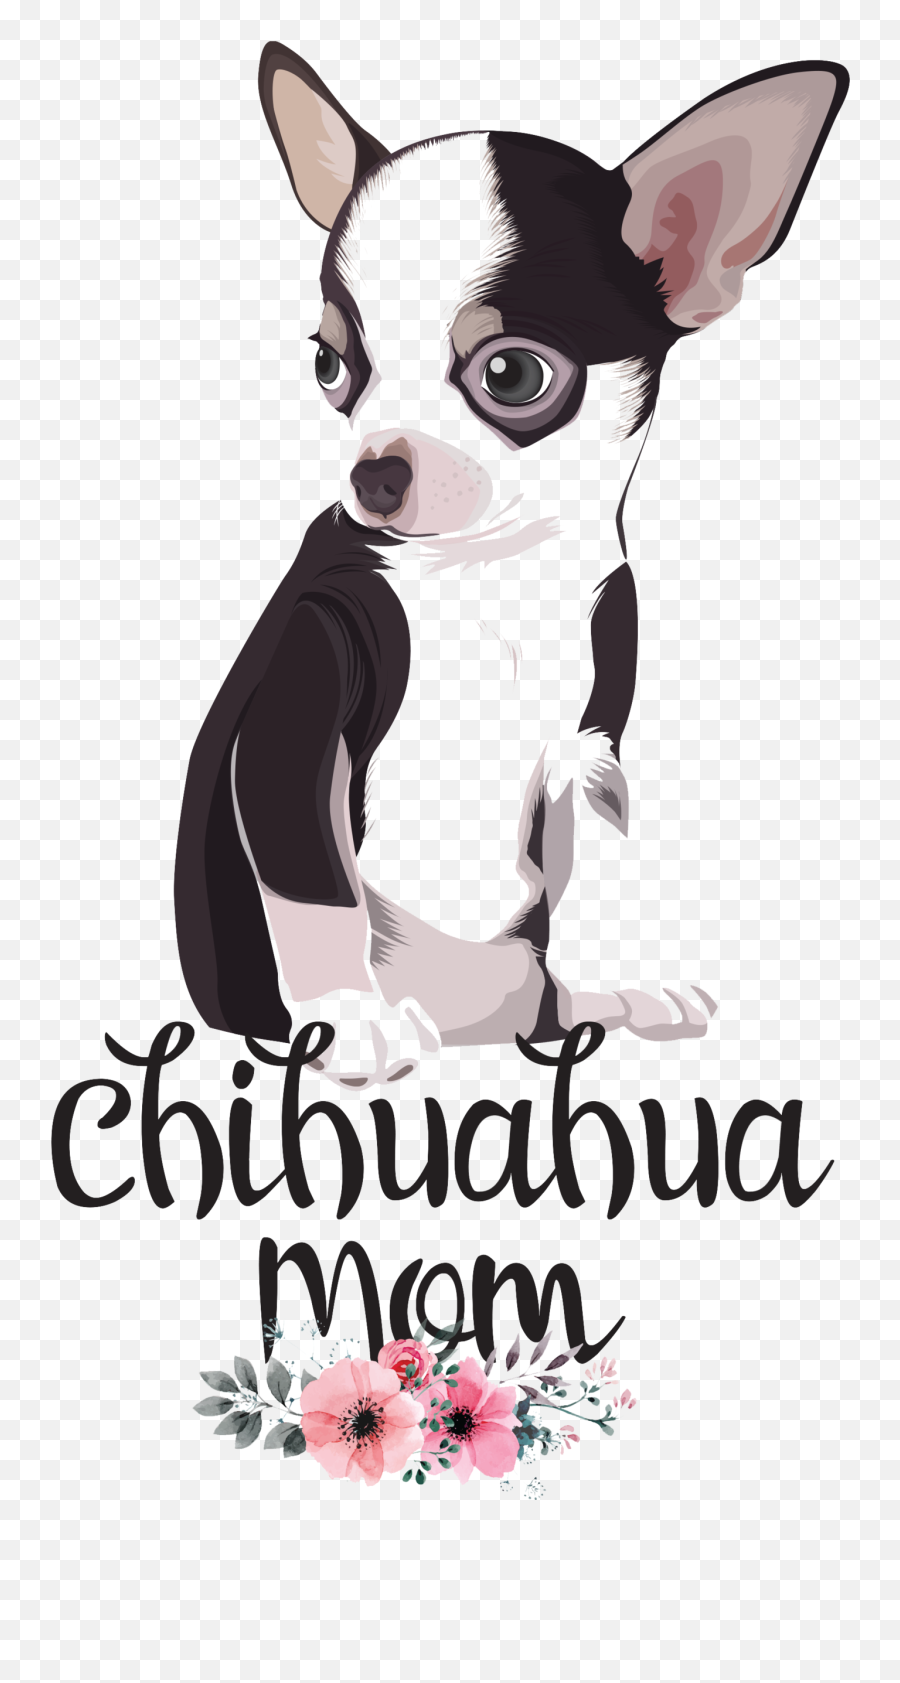 Download Chihuahua Mom Png Image With No Background - Pngkeycom Chihuahua In Cup Vector,Chihuahua Png